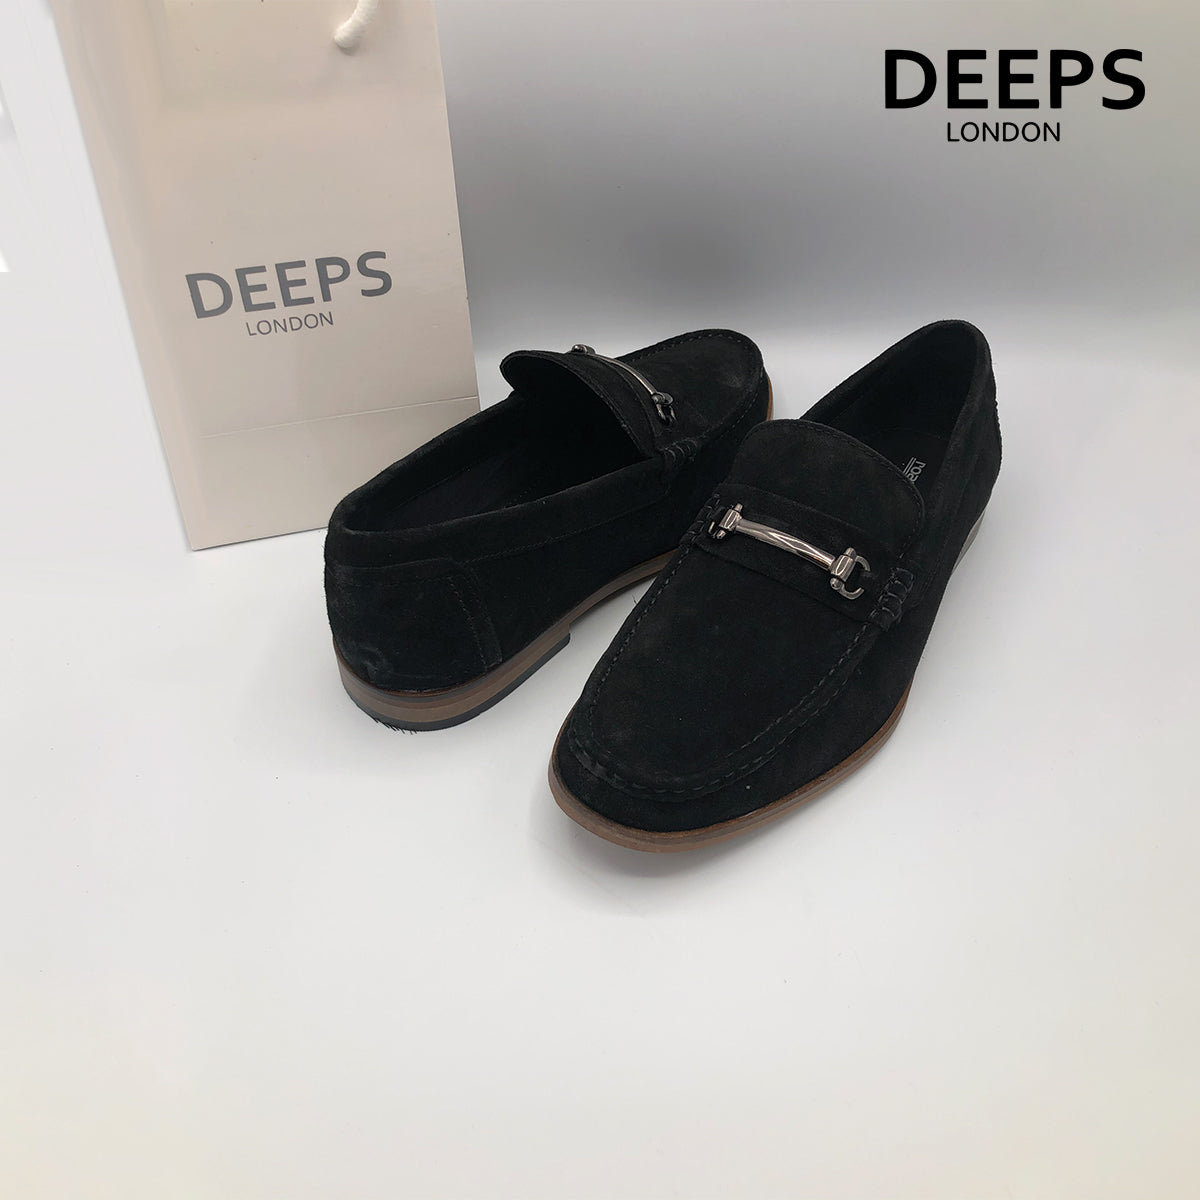 ROAMERS SLIP-ON CASUAL SUEDE DRIVING SHOES BLACK